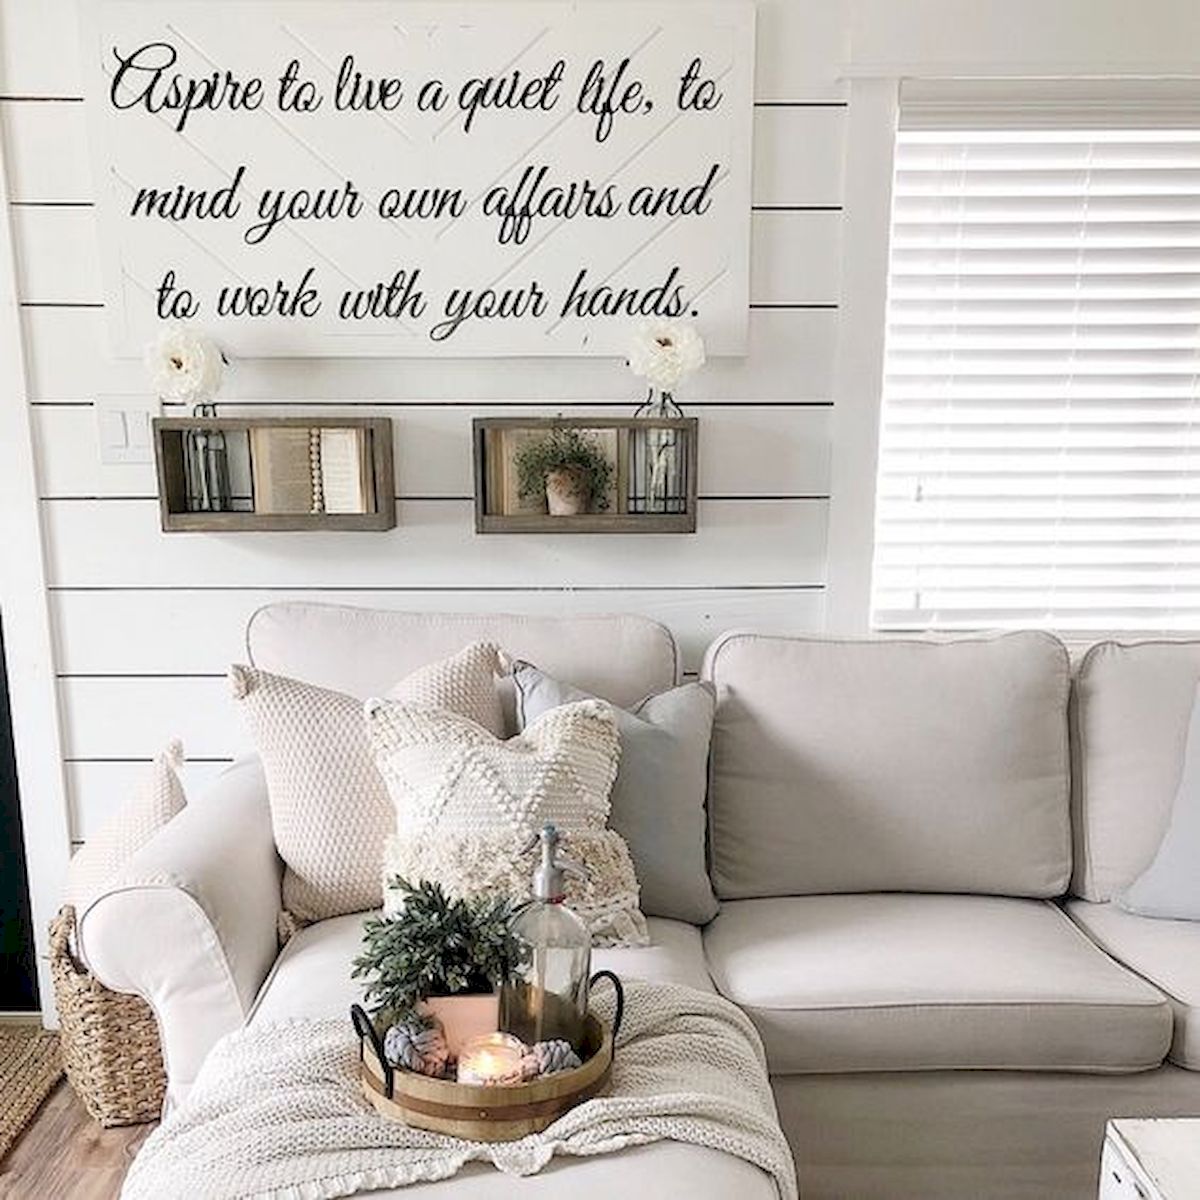 70 Awesome Wall Decoration Ideas for Living Room (34)